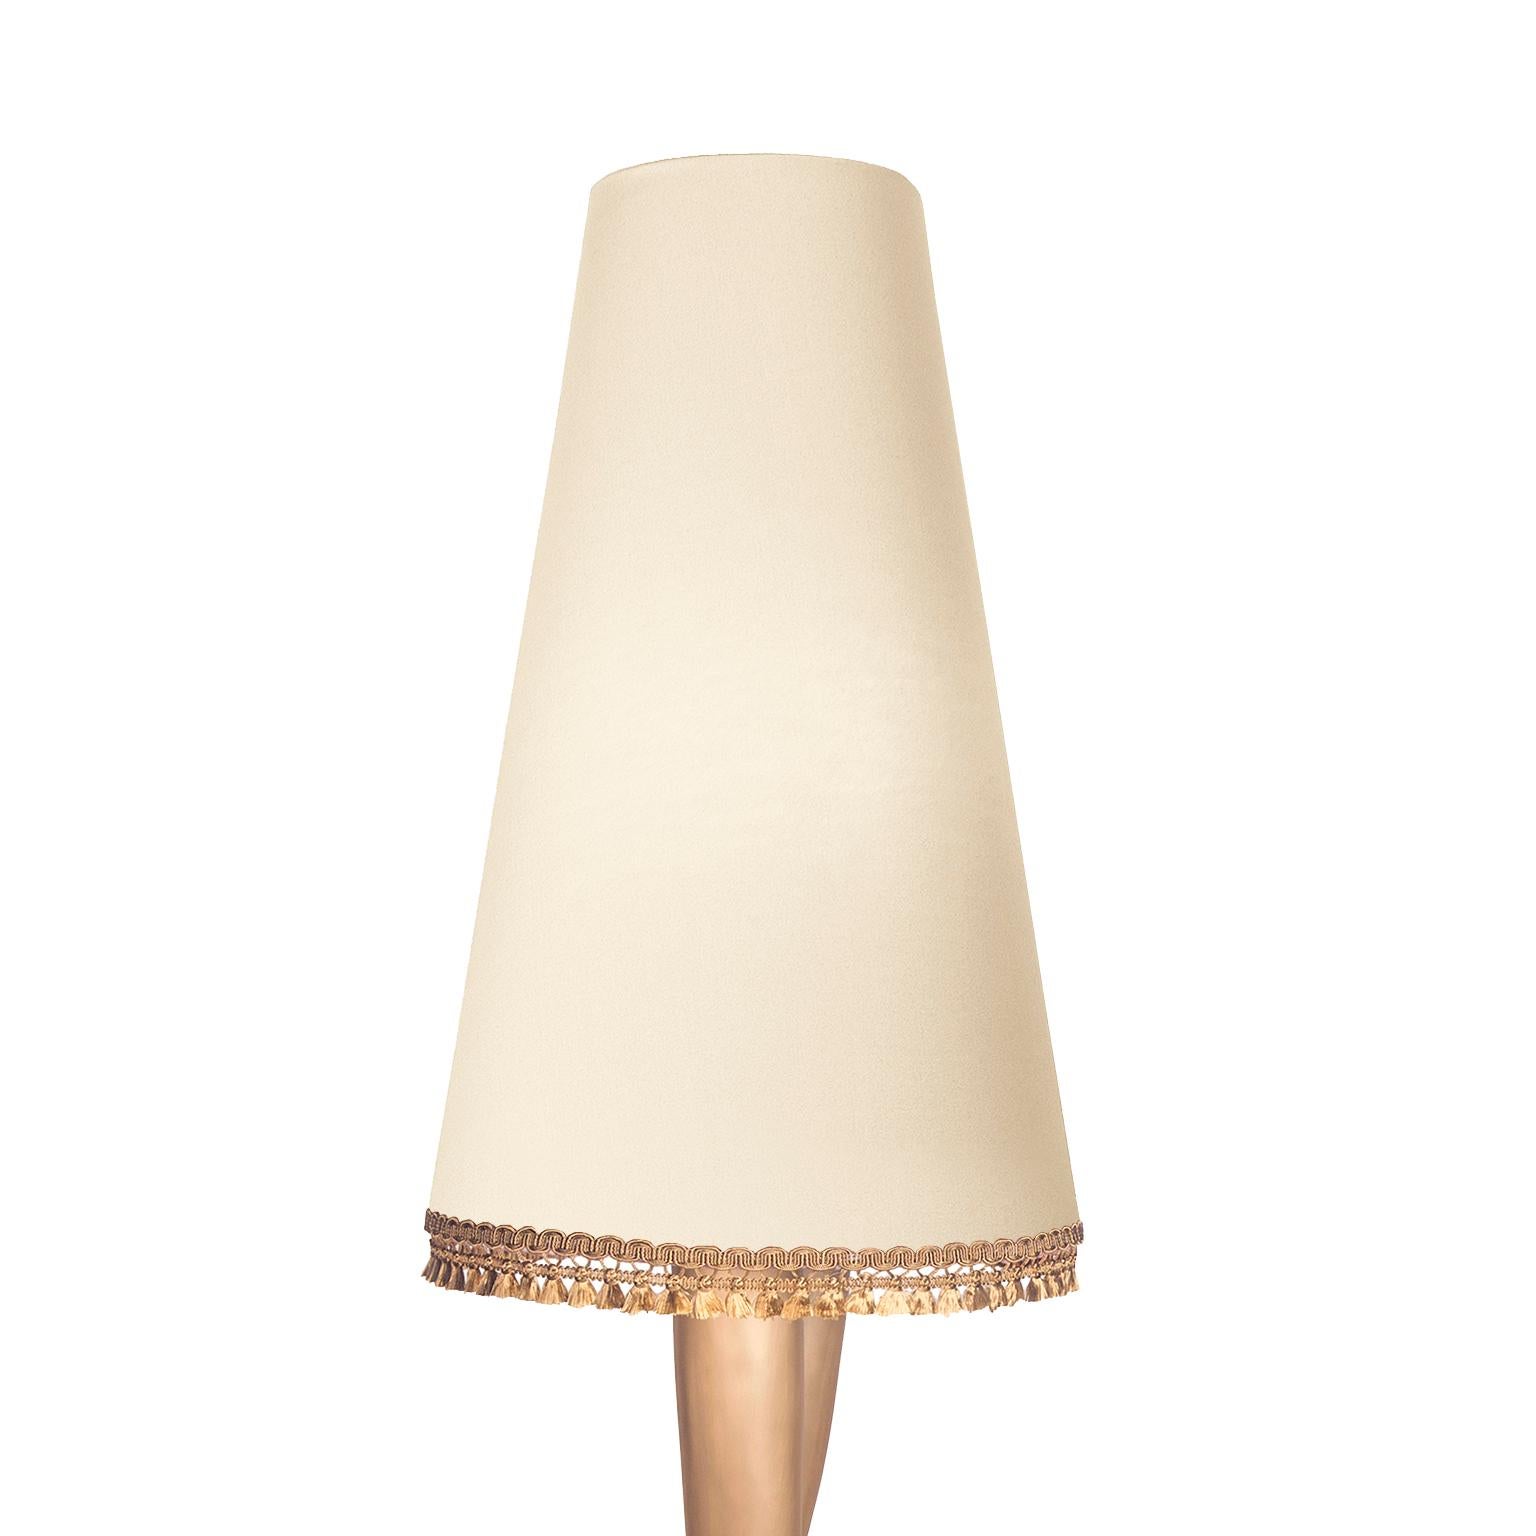 Portuguese Contemporary Monroe Floor Lamp, Brushed Brass and Beige Lampshade, Art Lighting For Sale